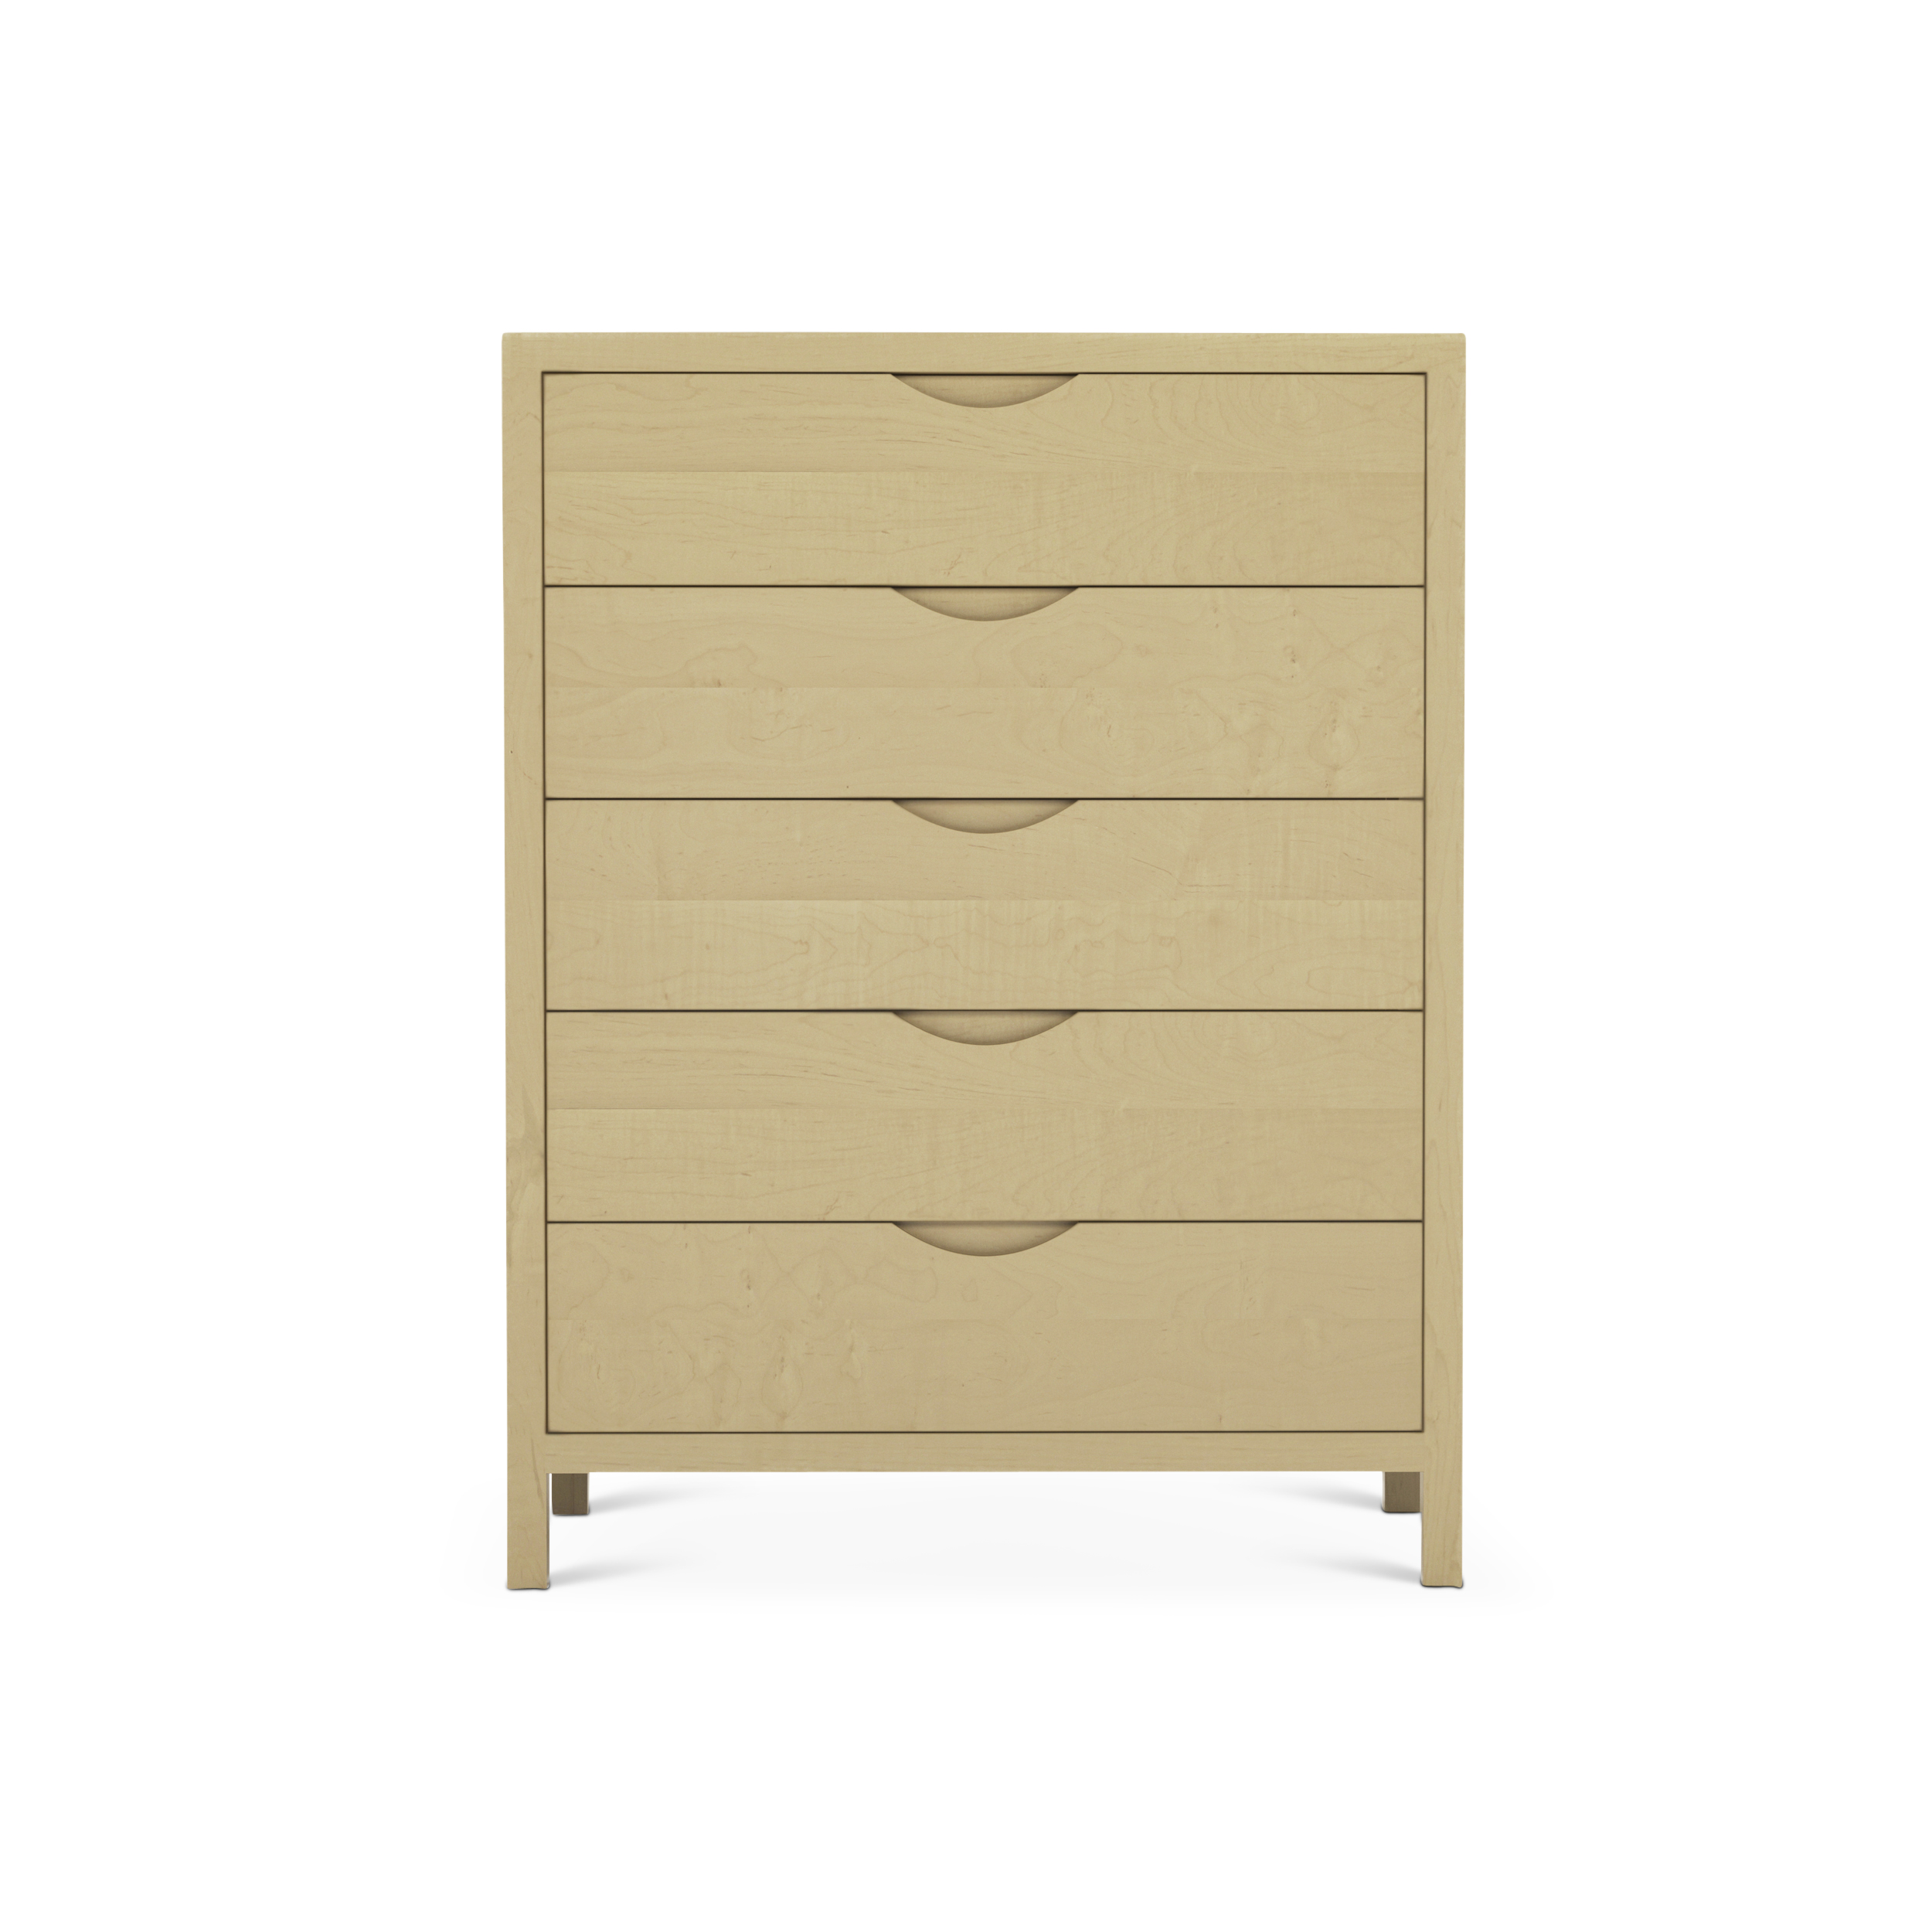 Series 353 Tall Dresser With Five Drawers At 36″ In Width